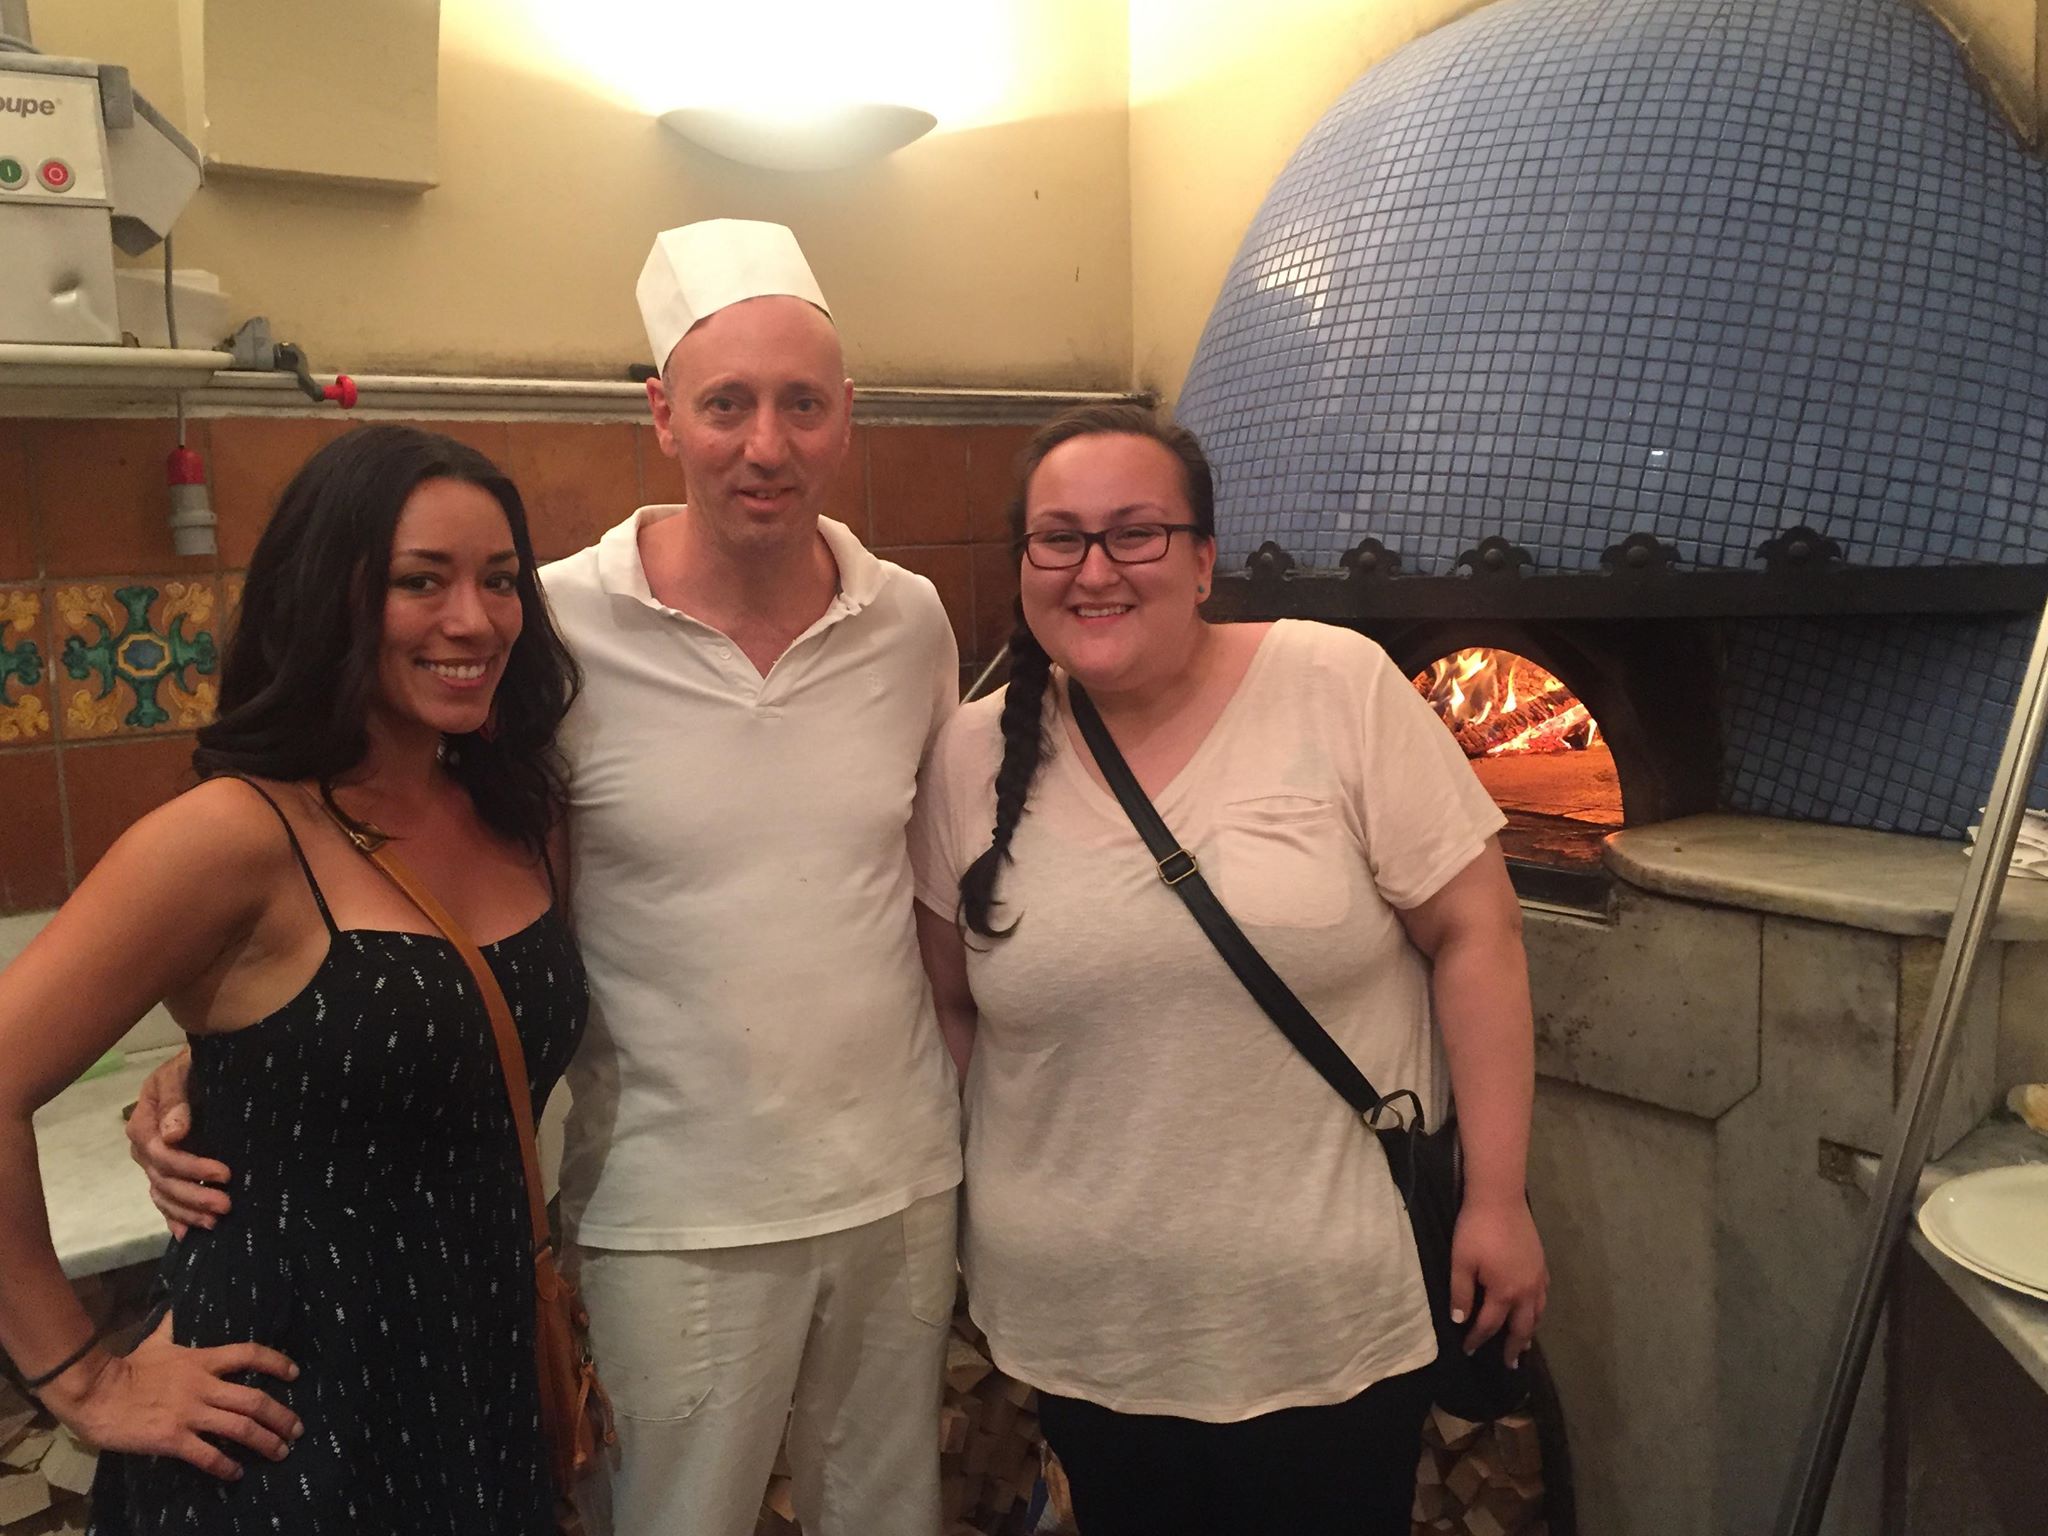 Crystal and bridgette with one of the pizzaiolos in rome.